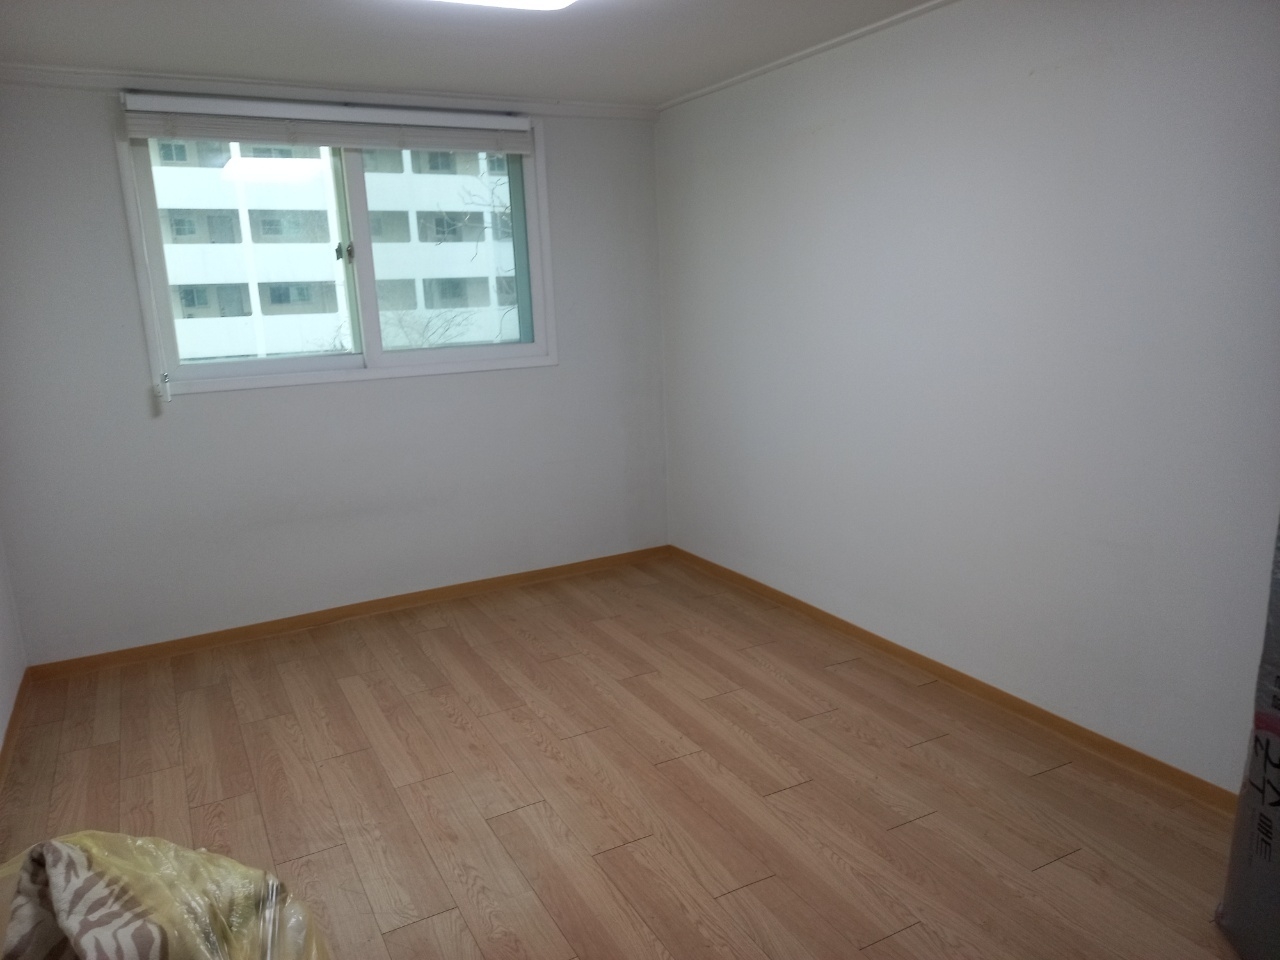 Bangbae-dong Apartment For Rent